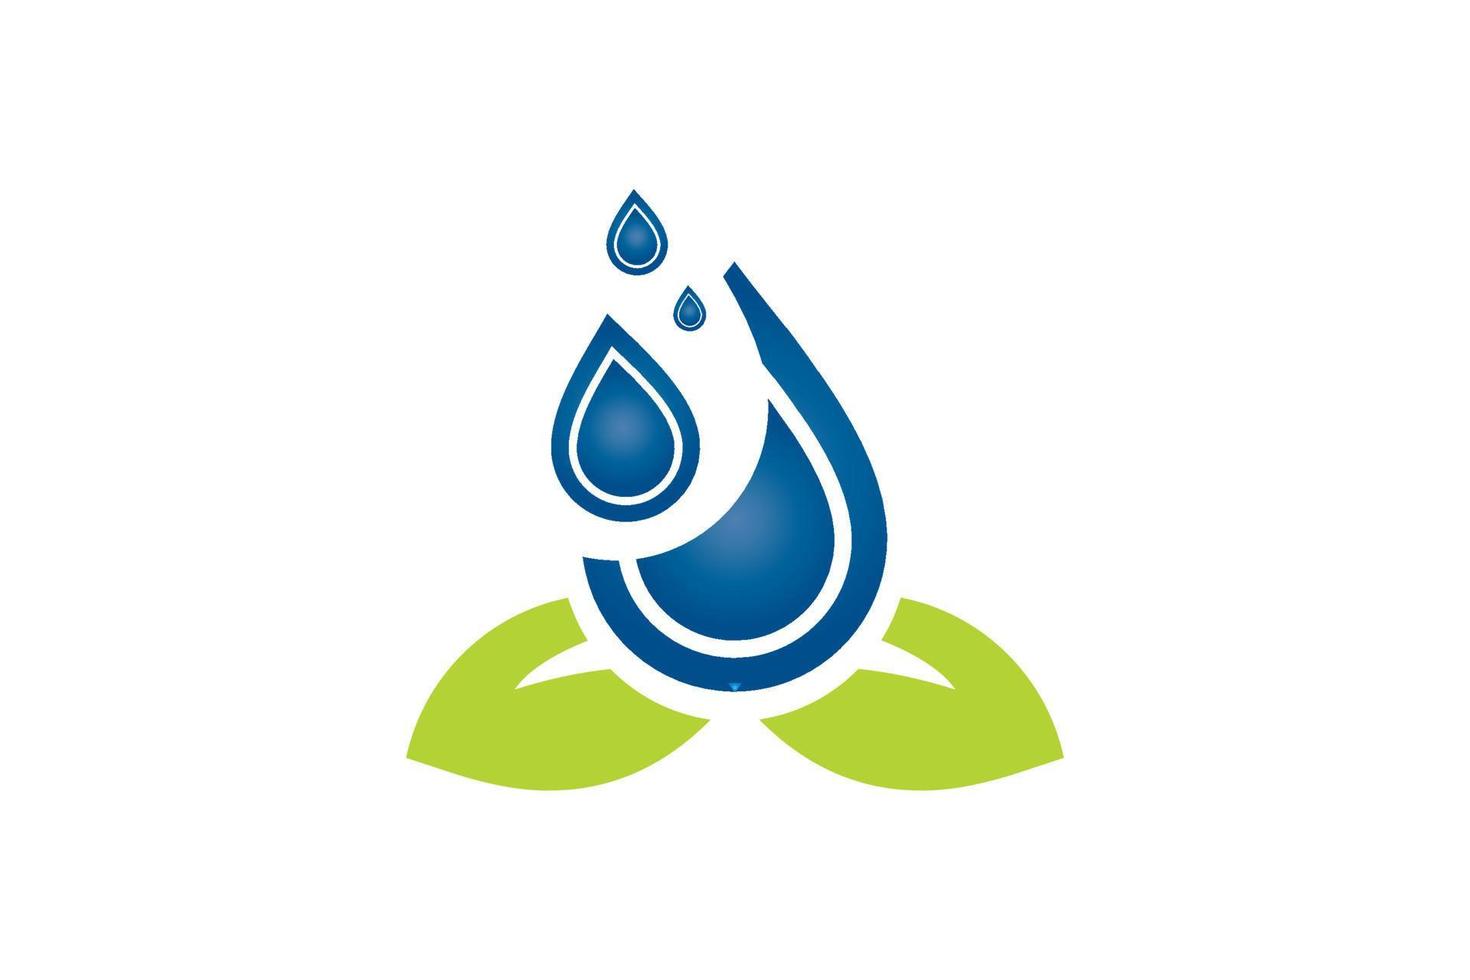 natural water icon. water drop sign. vector illustration elements